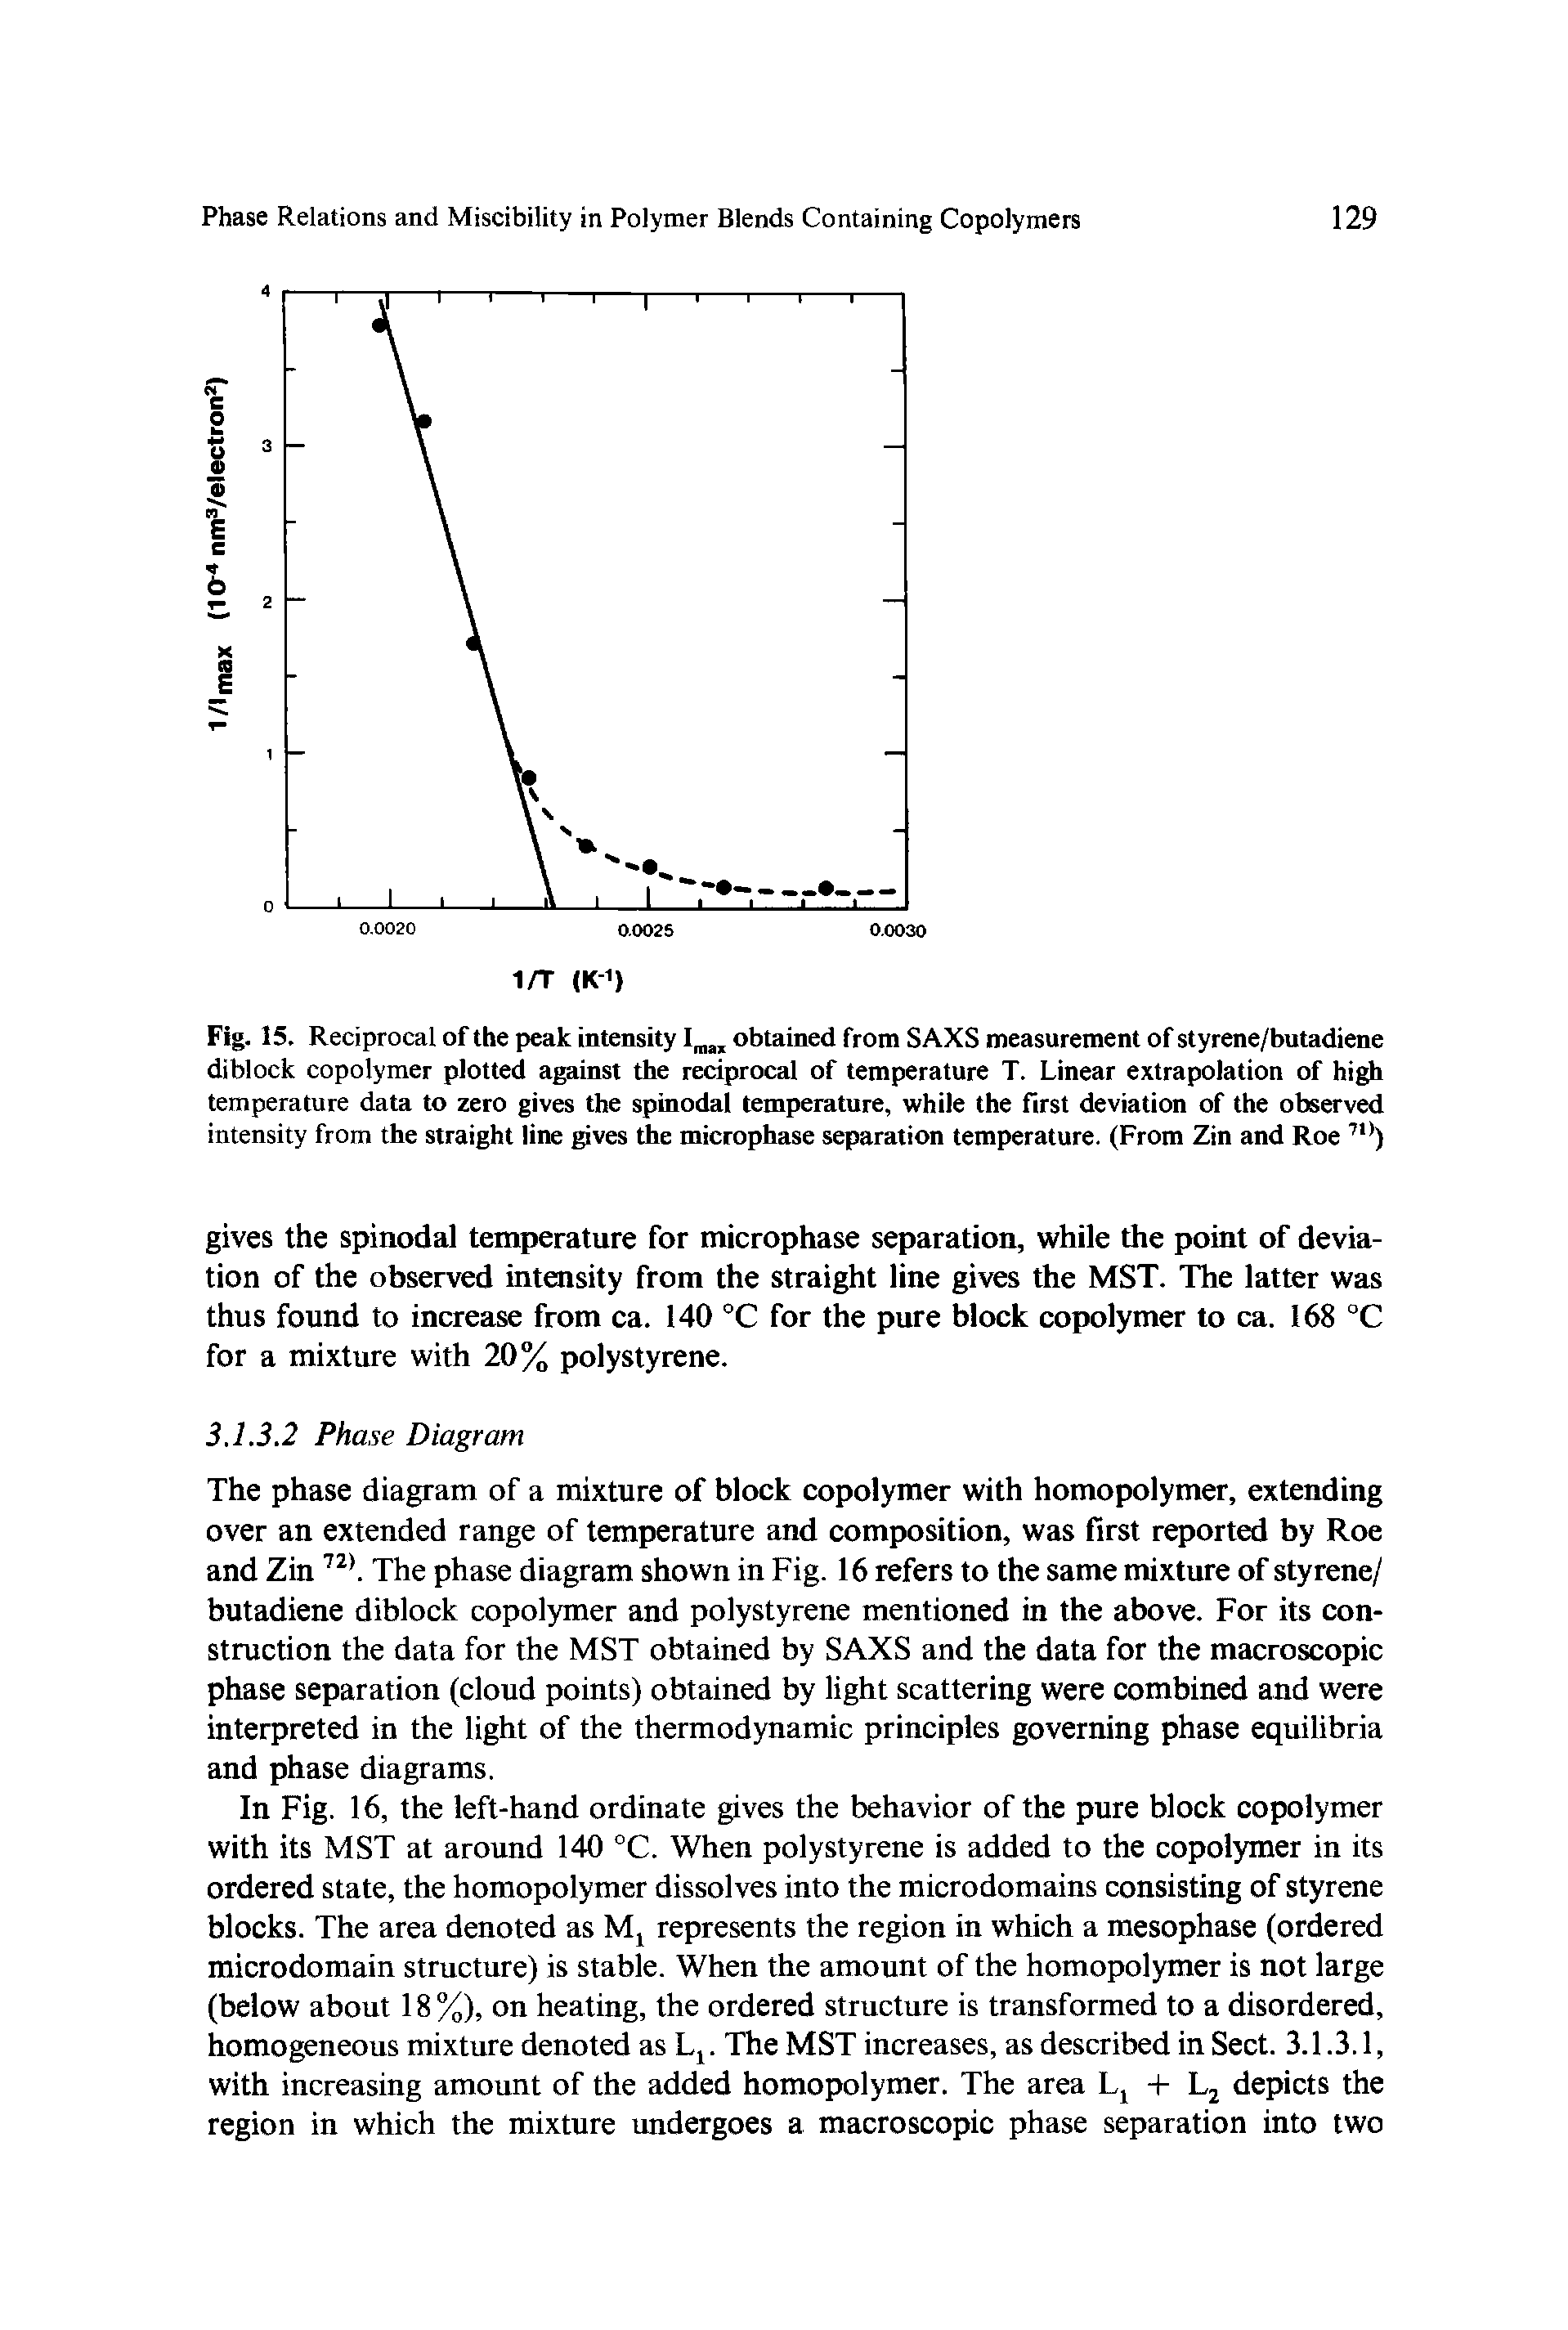 Fig. 15. Reciprocal of the peak intensity obtained from SAXS measurement of styrene/butadiene diblock copolymer plotted against the reciprocal of temperature T. Linear extrapolation of high temperature data to zero gives the spinodal temperature, while the first deviation of the observed intensity from the straight line gives the microphase separation temperature. (From Zin and Roe...